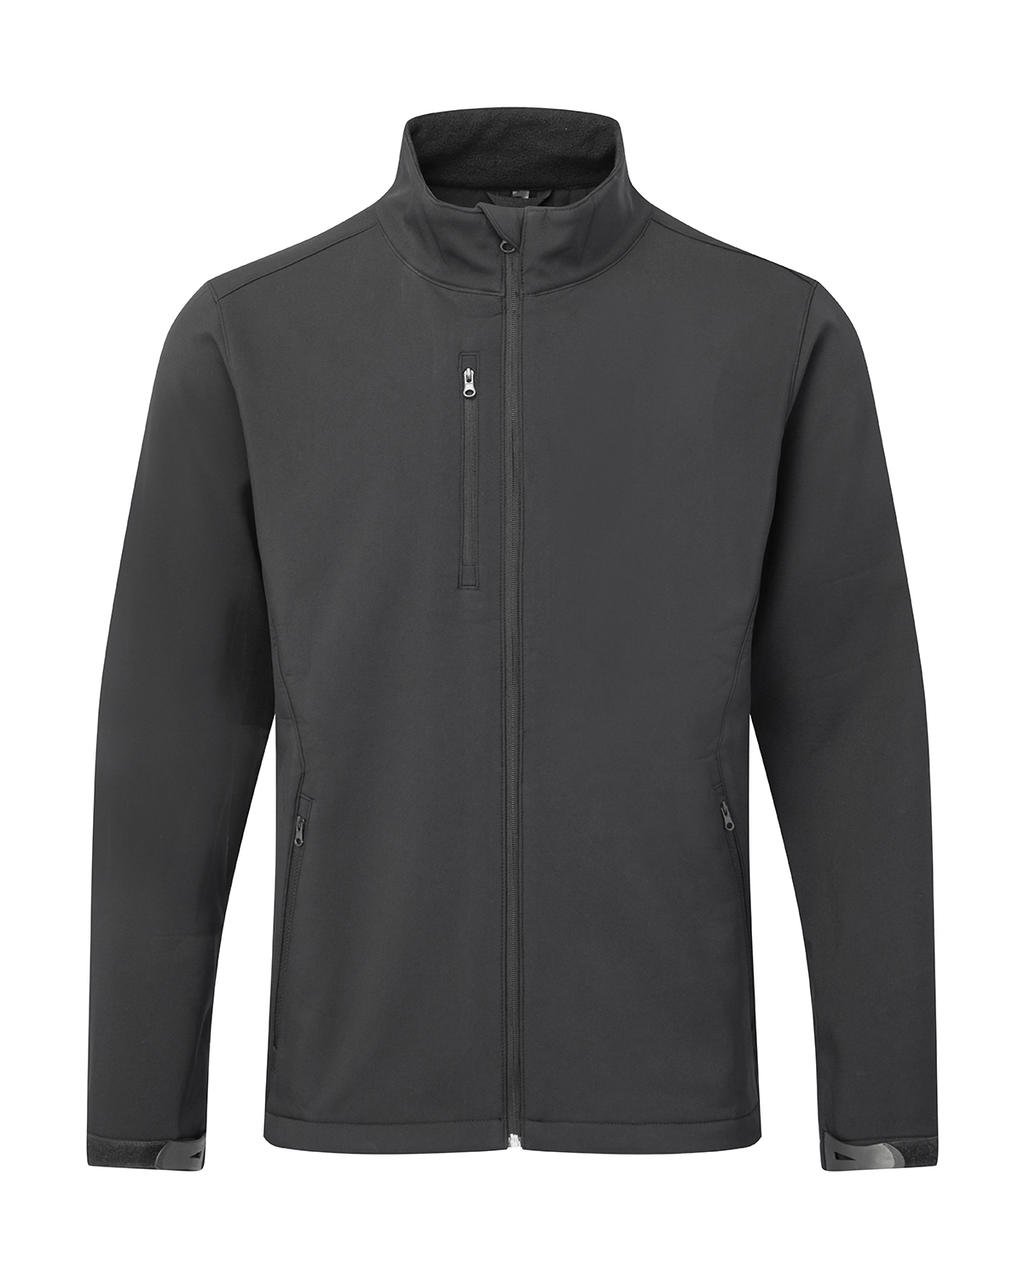  Mens Softshell Jacket in Farbe Charcoal